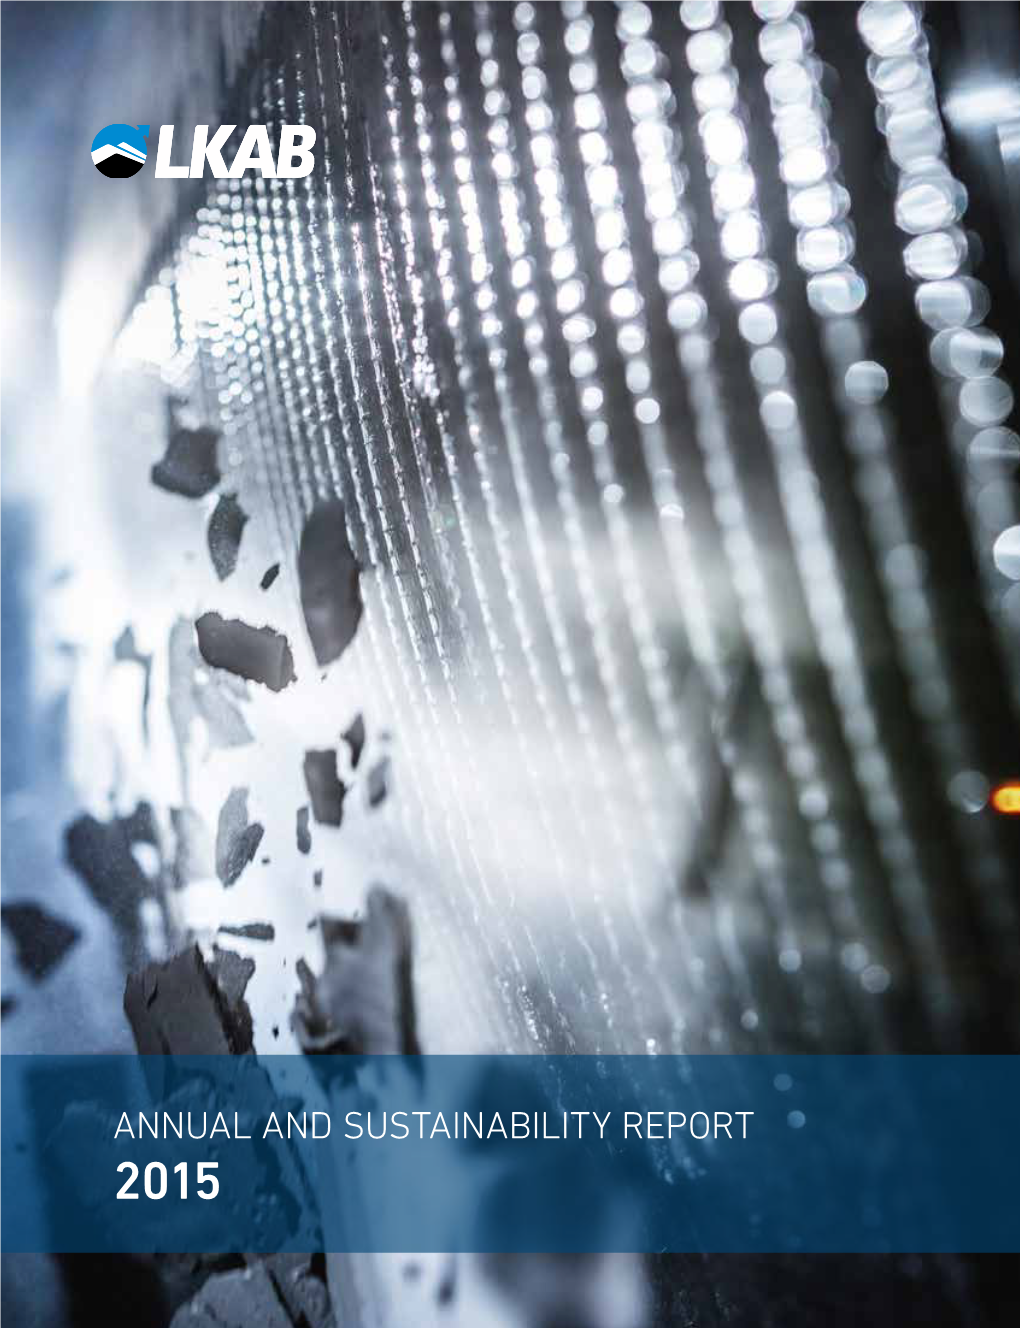 LKAB 2015 Annual and Sustainability Report